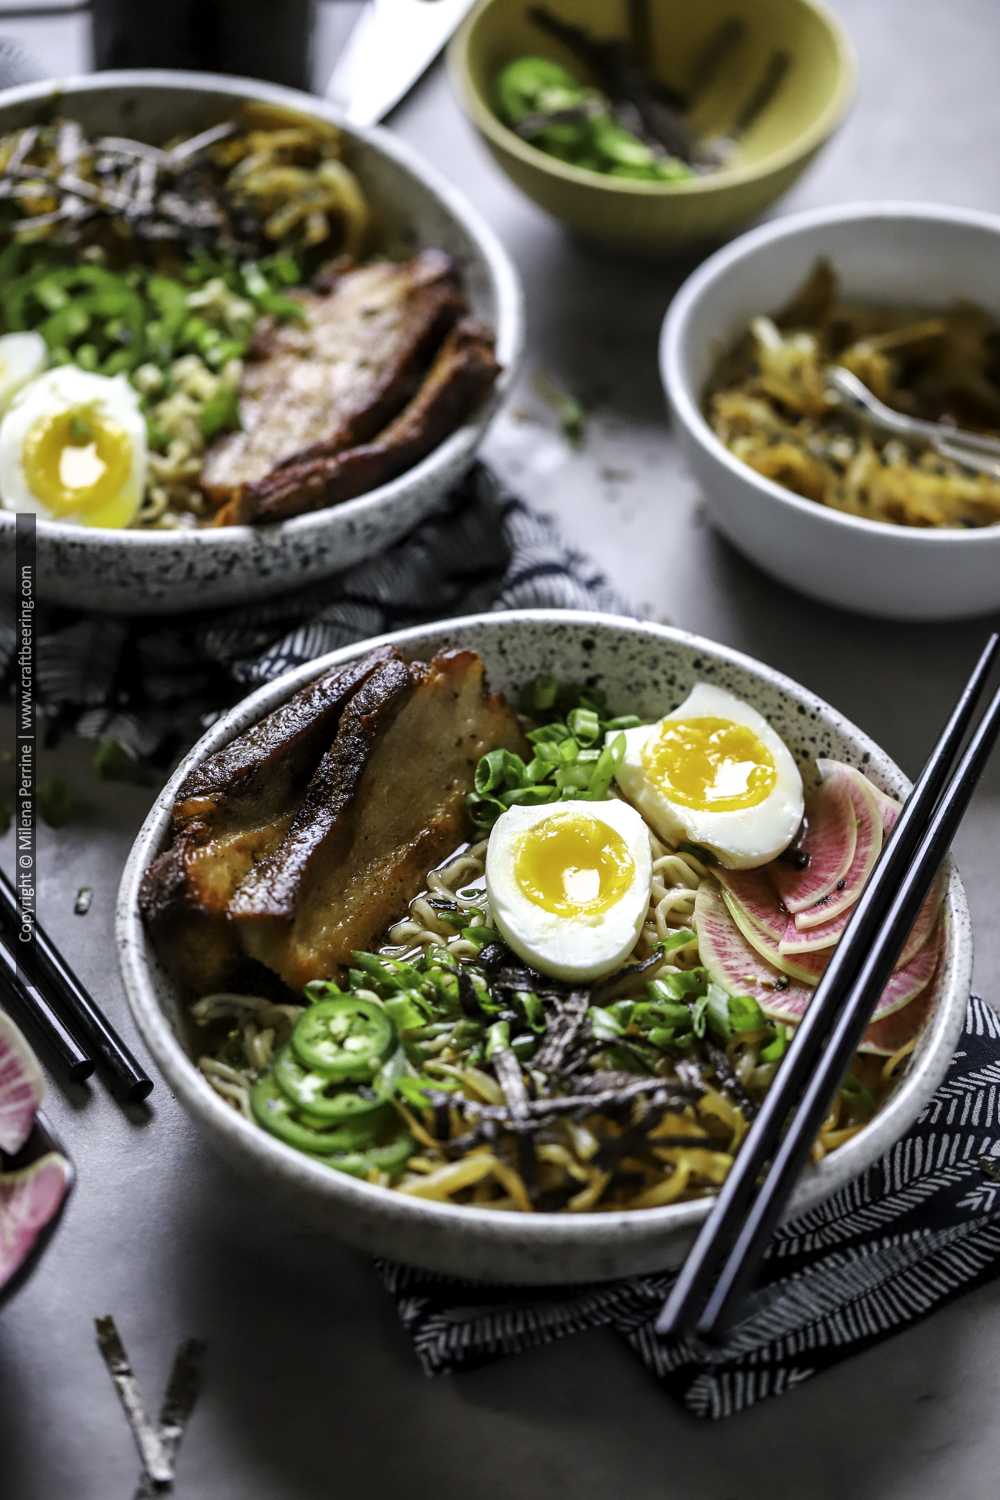 Pork ramen bowl with crispy pork belly slices, soft boiled egg, nori, bean sprouts and watermelon radish.